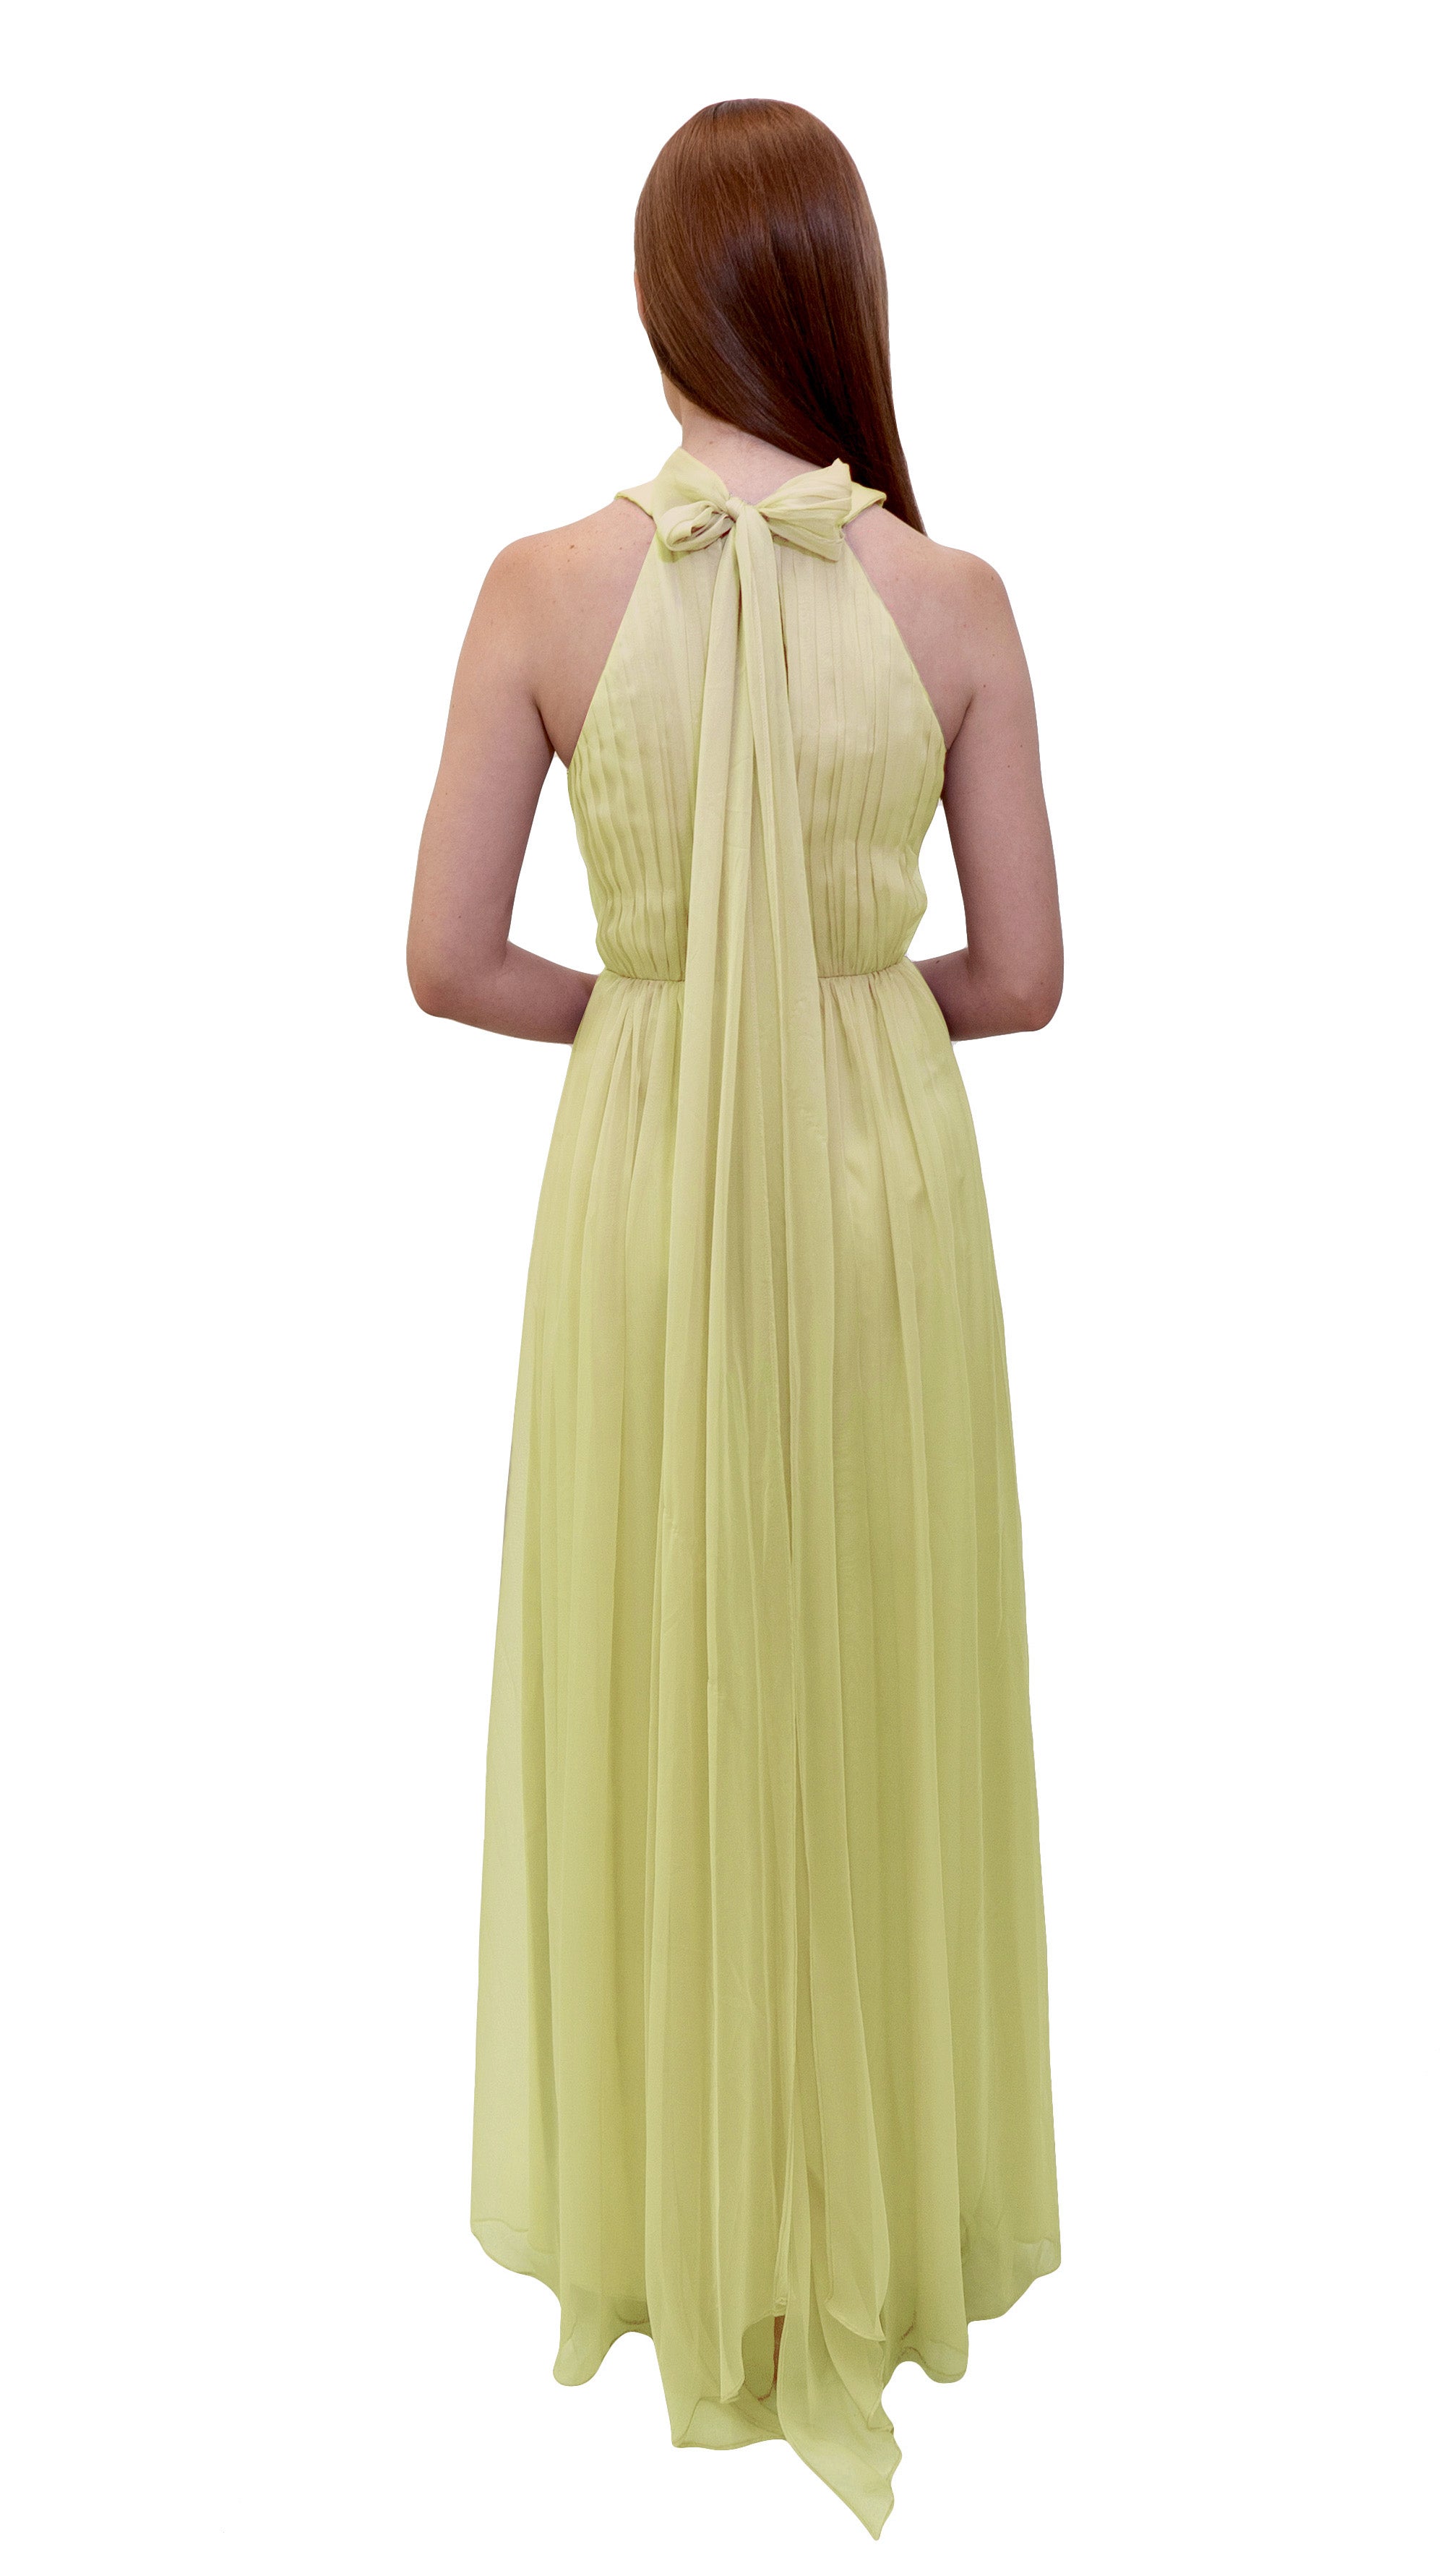 Pastel Yellow Evening Gowns for Pageants - Darius Cordell Fashion Ltd